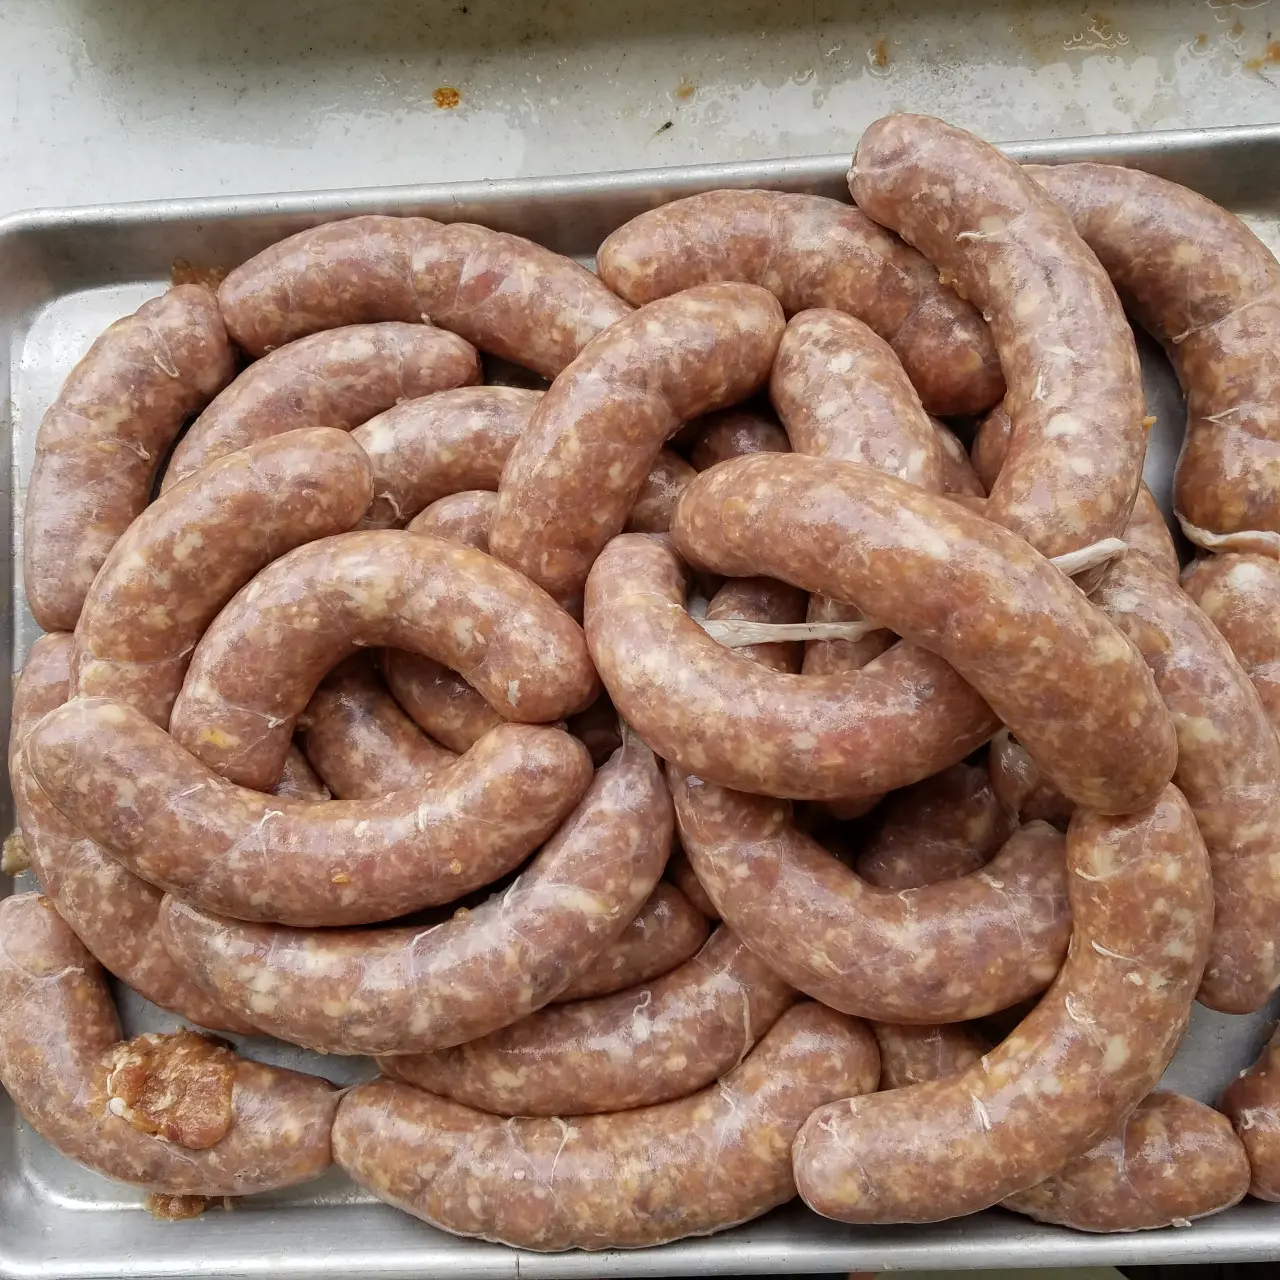 smoked venison sausage - What meat is venison sausage